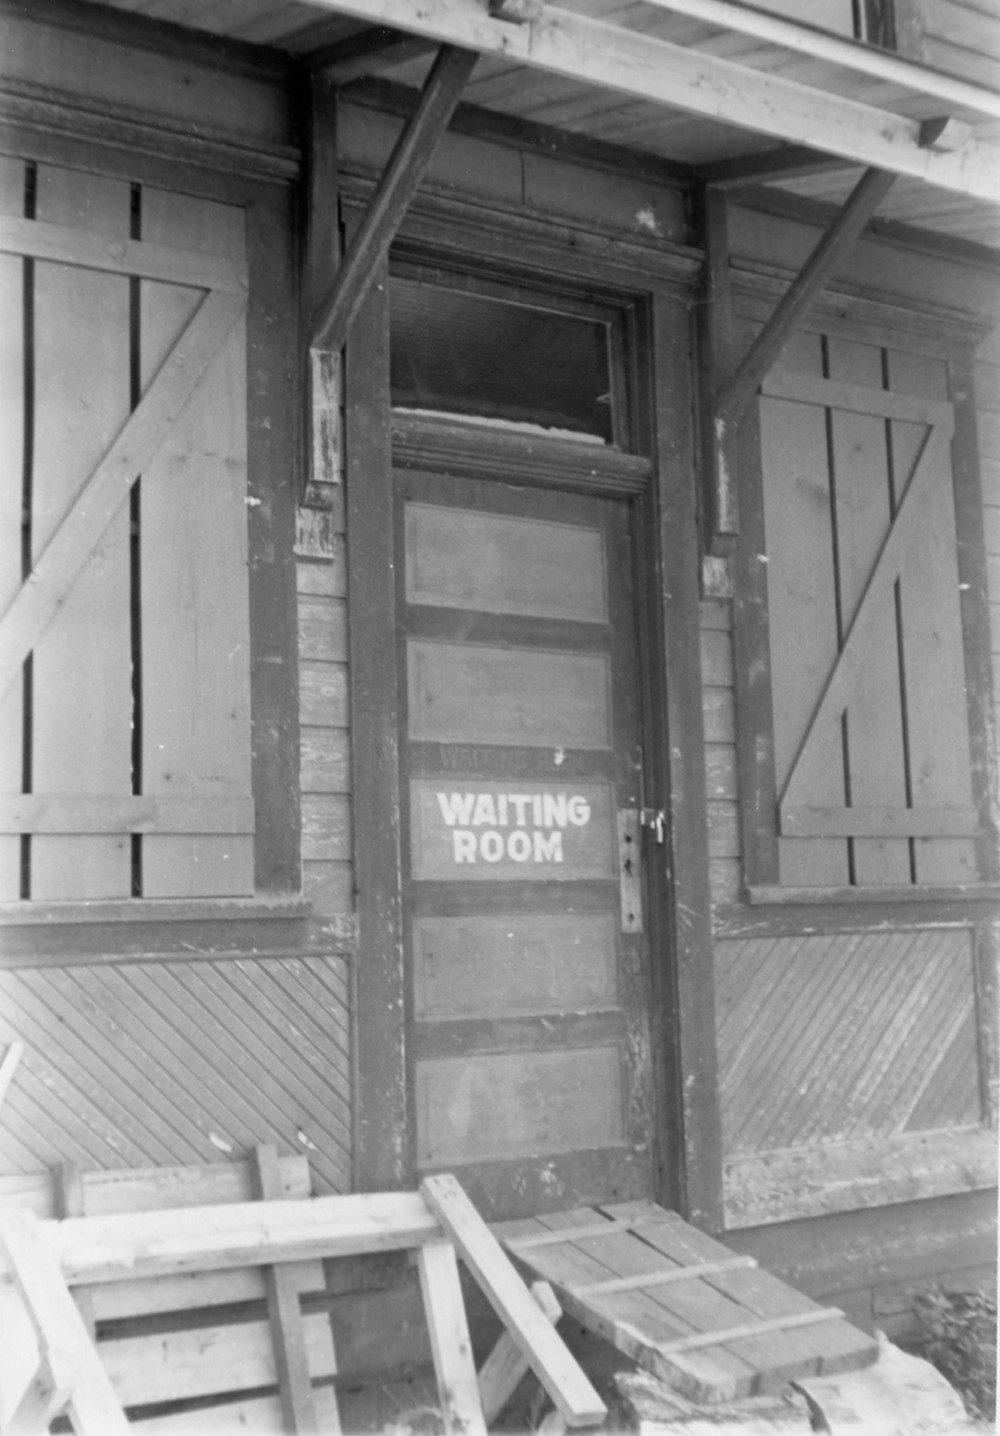 Sumpter Valley Railway Passenger Station, Prairie City Oregon North entrance to waiting room (1980)